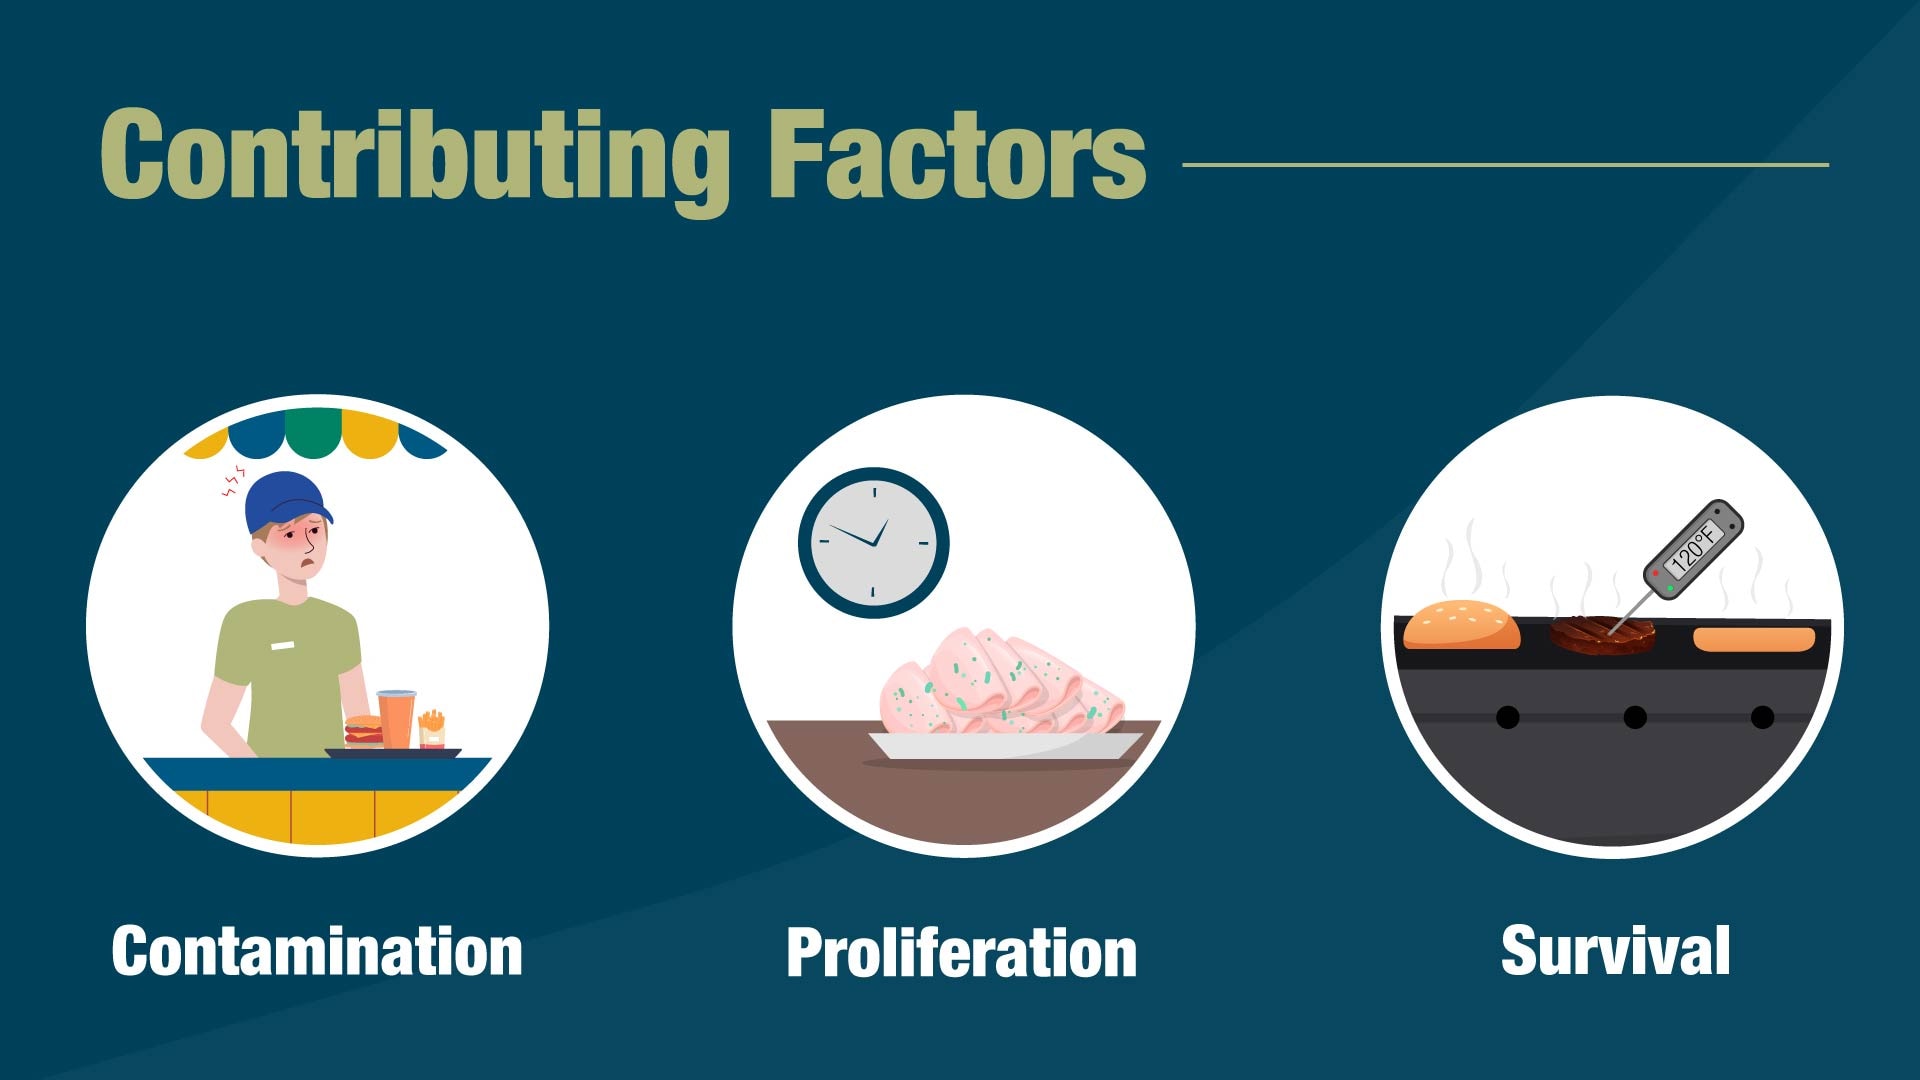 Graphic of three types of contributing factors: contamination, proliferation, and survival.